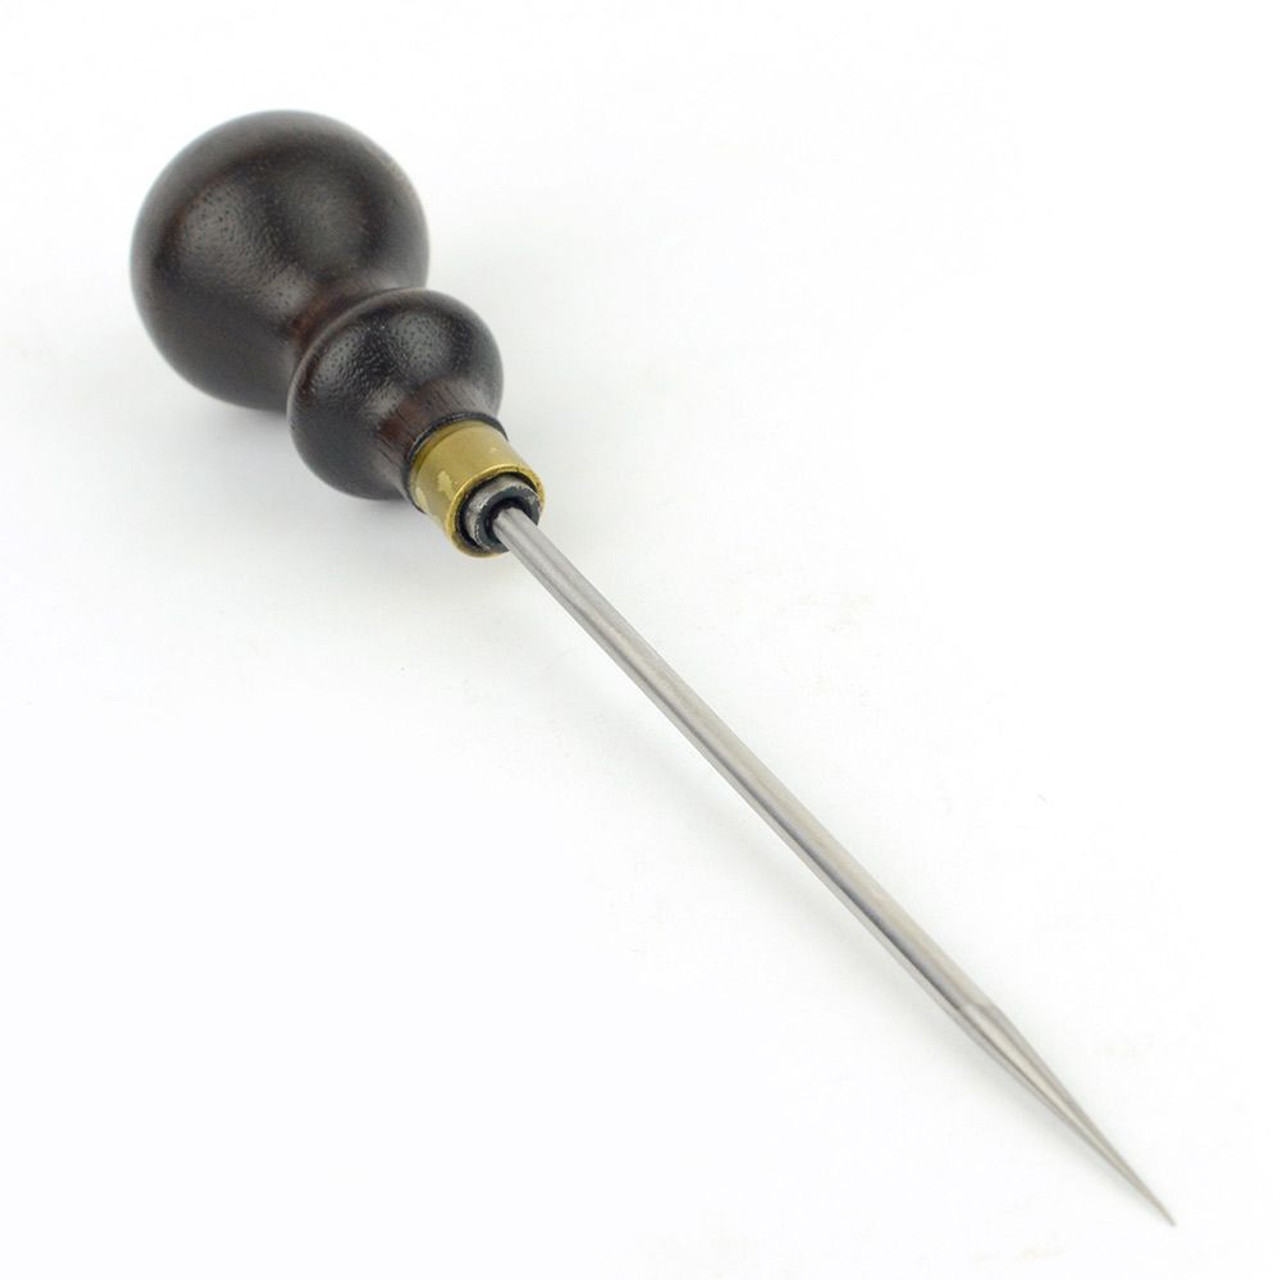 CROWN TOOLS 114R SCRATCH AWL, BENCHWOOD HANDLE 20110